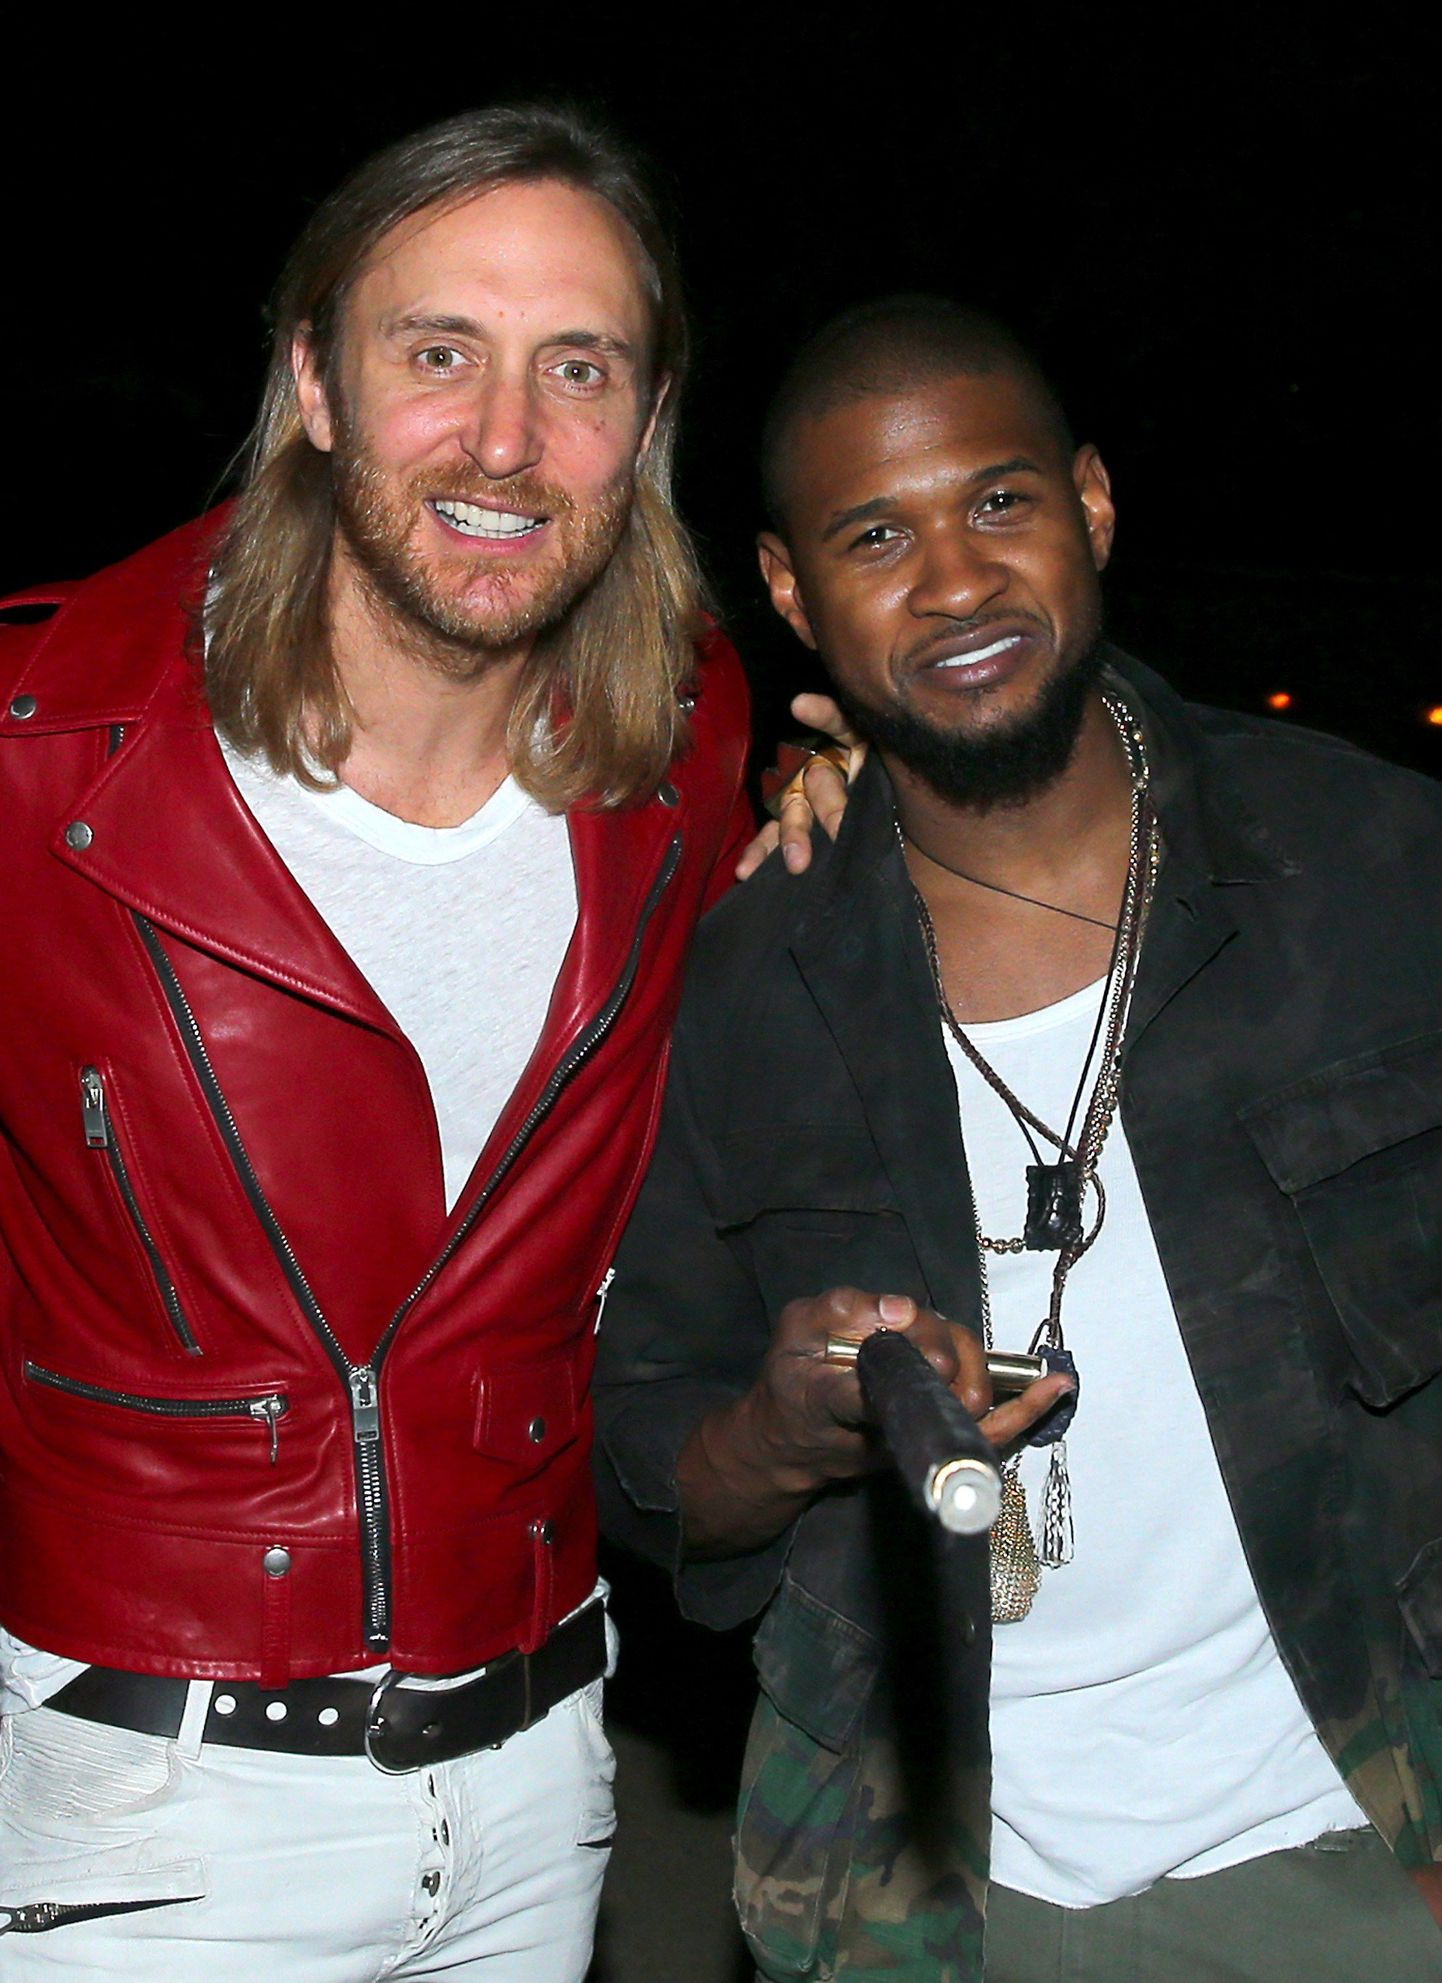 INDIO, CA - APRIL 12: DJ David Guetta (L) and singer Usher attend day 3 of the 2015 Coachella Valley Music & Arts Festival (Weekend 1) at the Empire Polo Club on April 12, 2015 in Indio, California.   Mark Davis/Getty Images for Coachella/AFP
== FOR NEWSPAPERS, INTERNET, TELCOS & TELEVISION USE ONLY ==